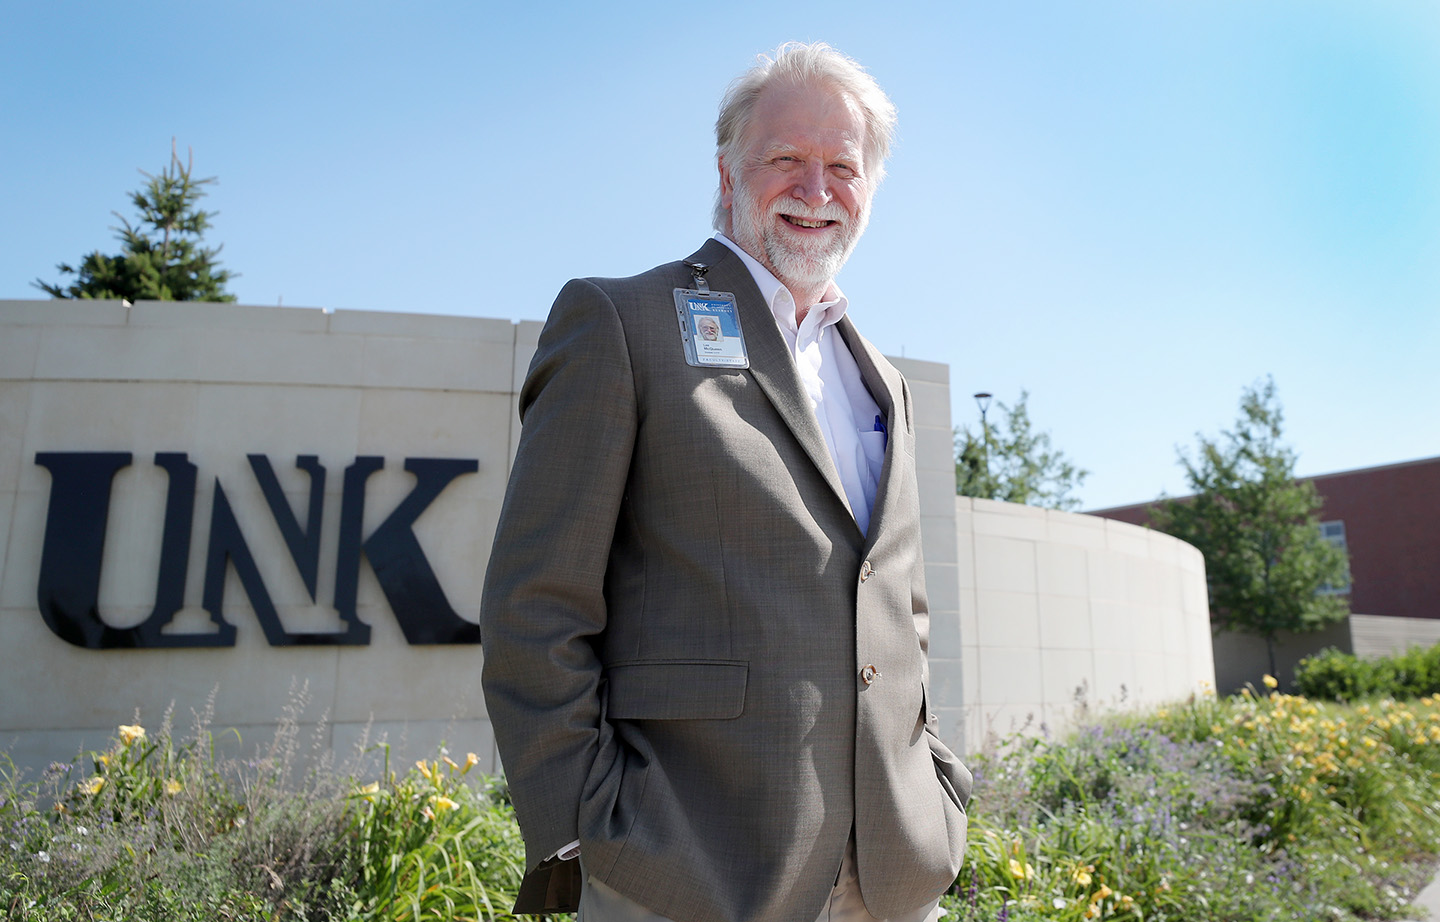 Lee McQueen is retiring from UNK after spending 16 years as director of Facilities Management and Planning. (Photo by Erika Pritchard, UNK Communications)